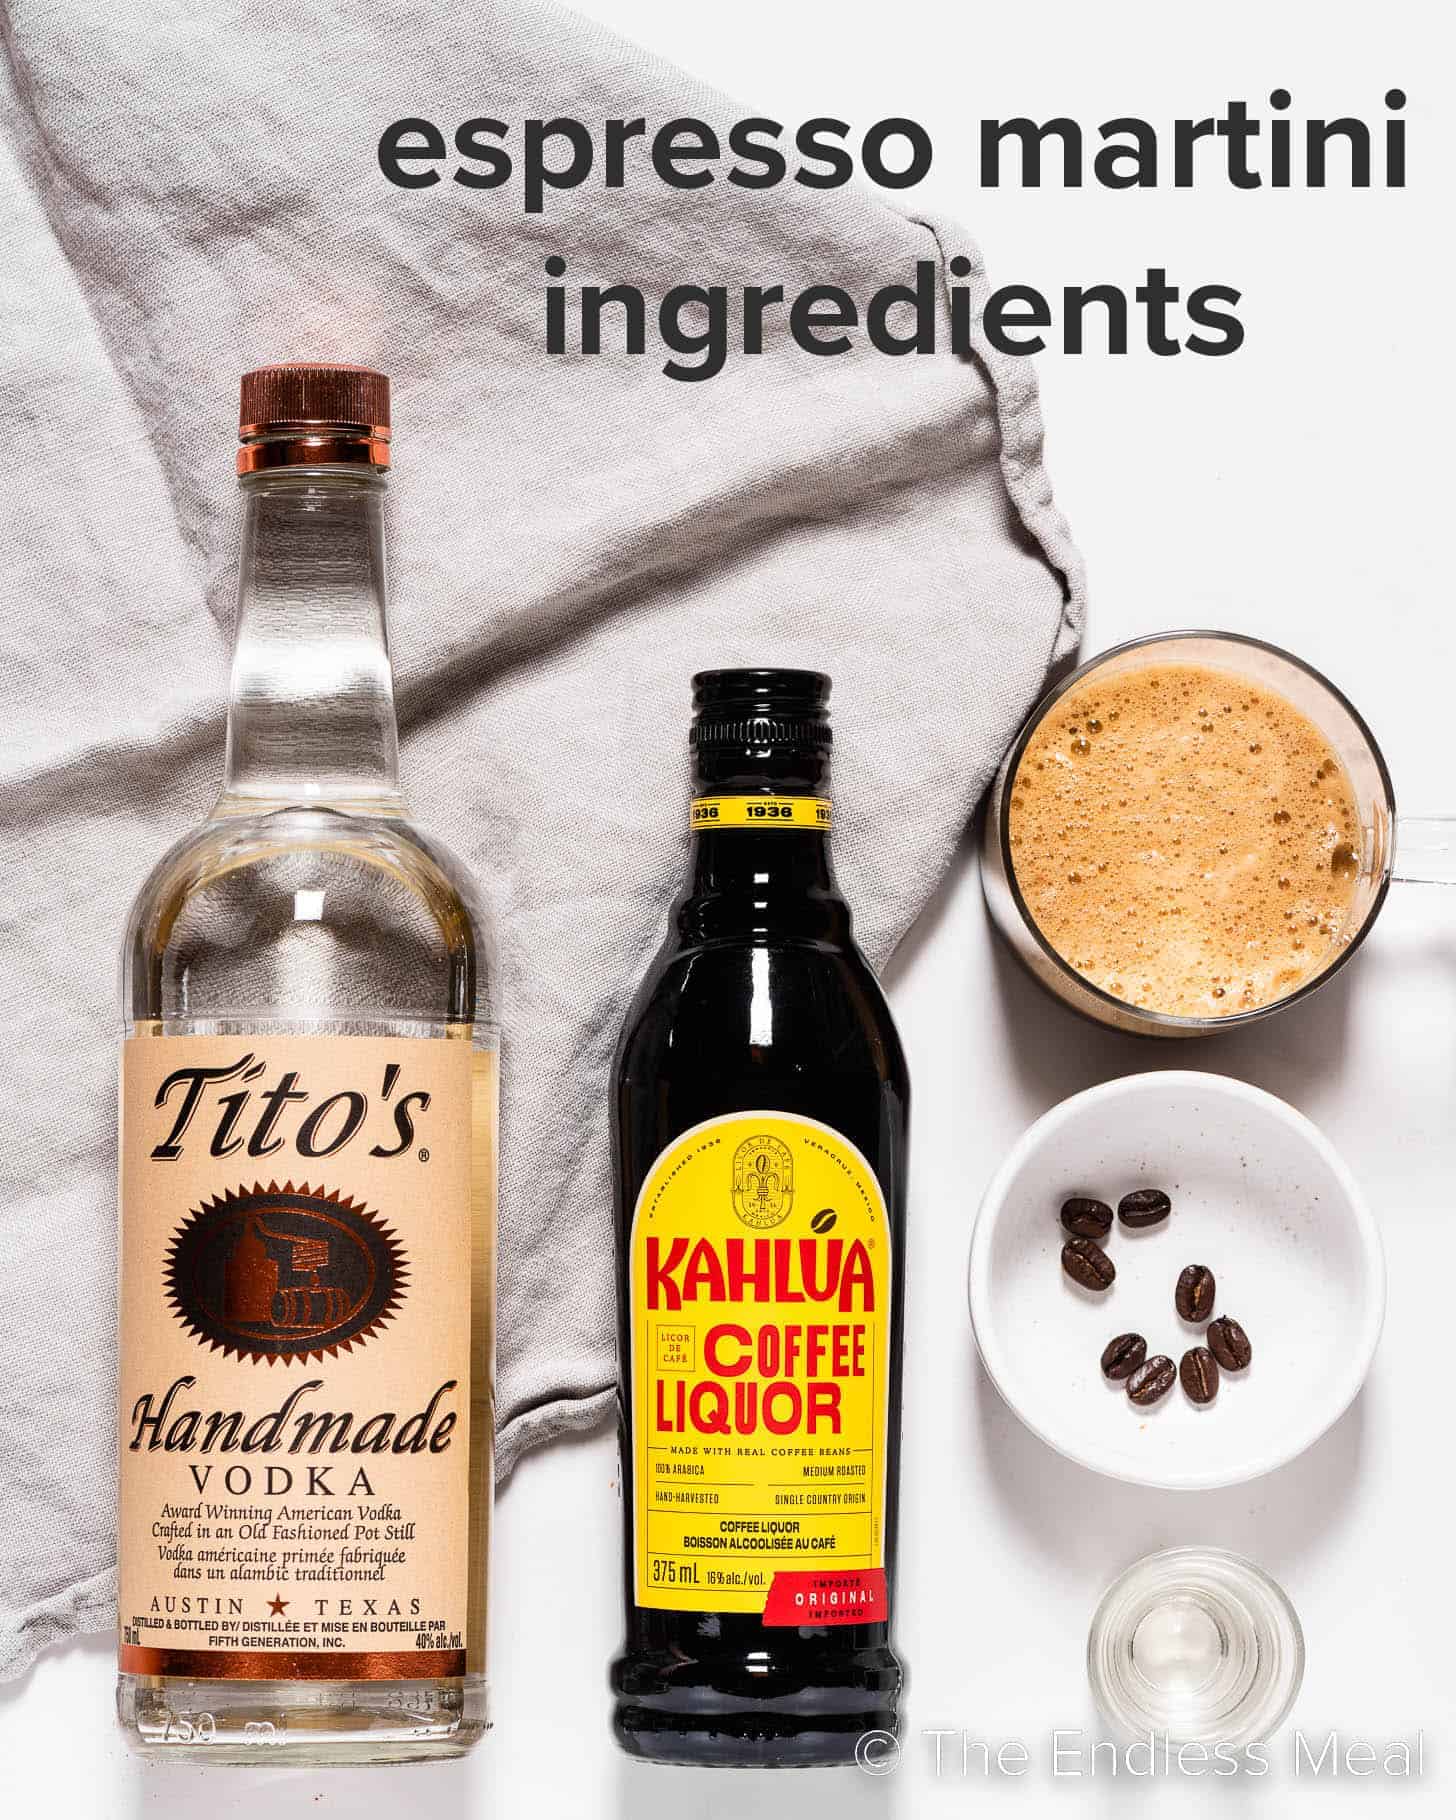 The ingredients needed to make an Espresso Martini.